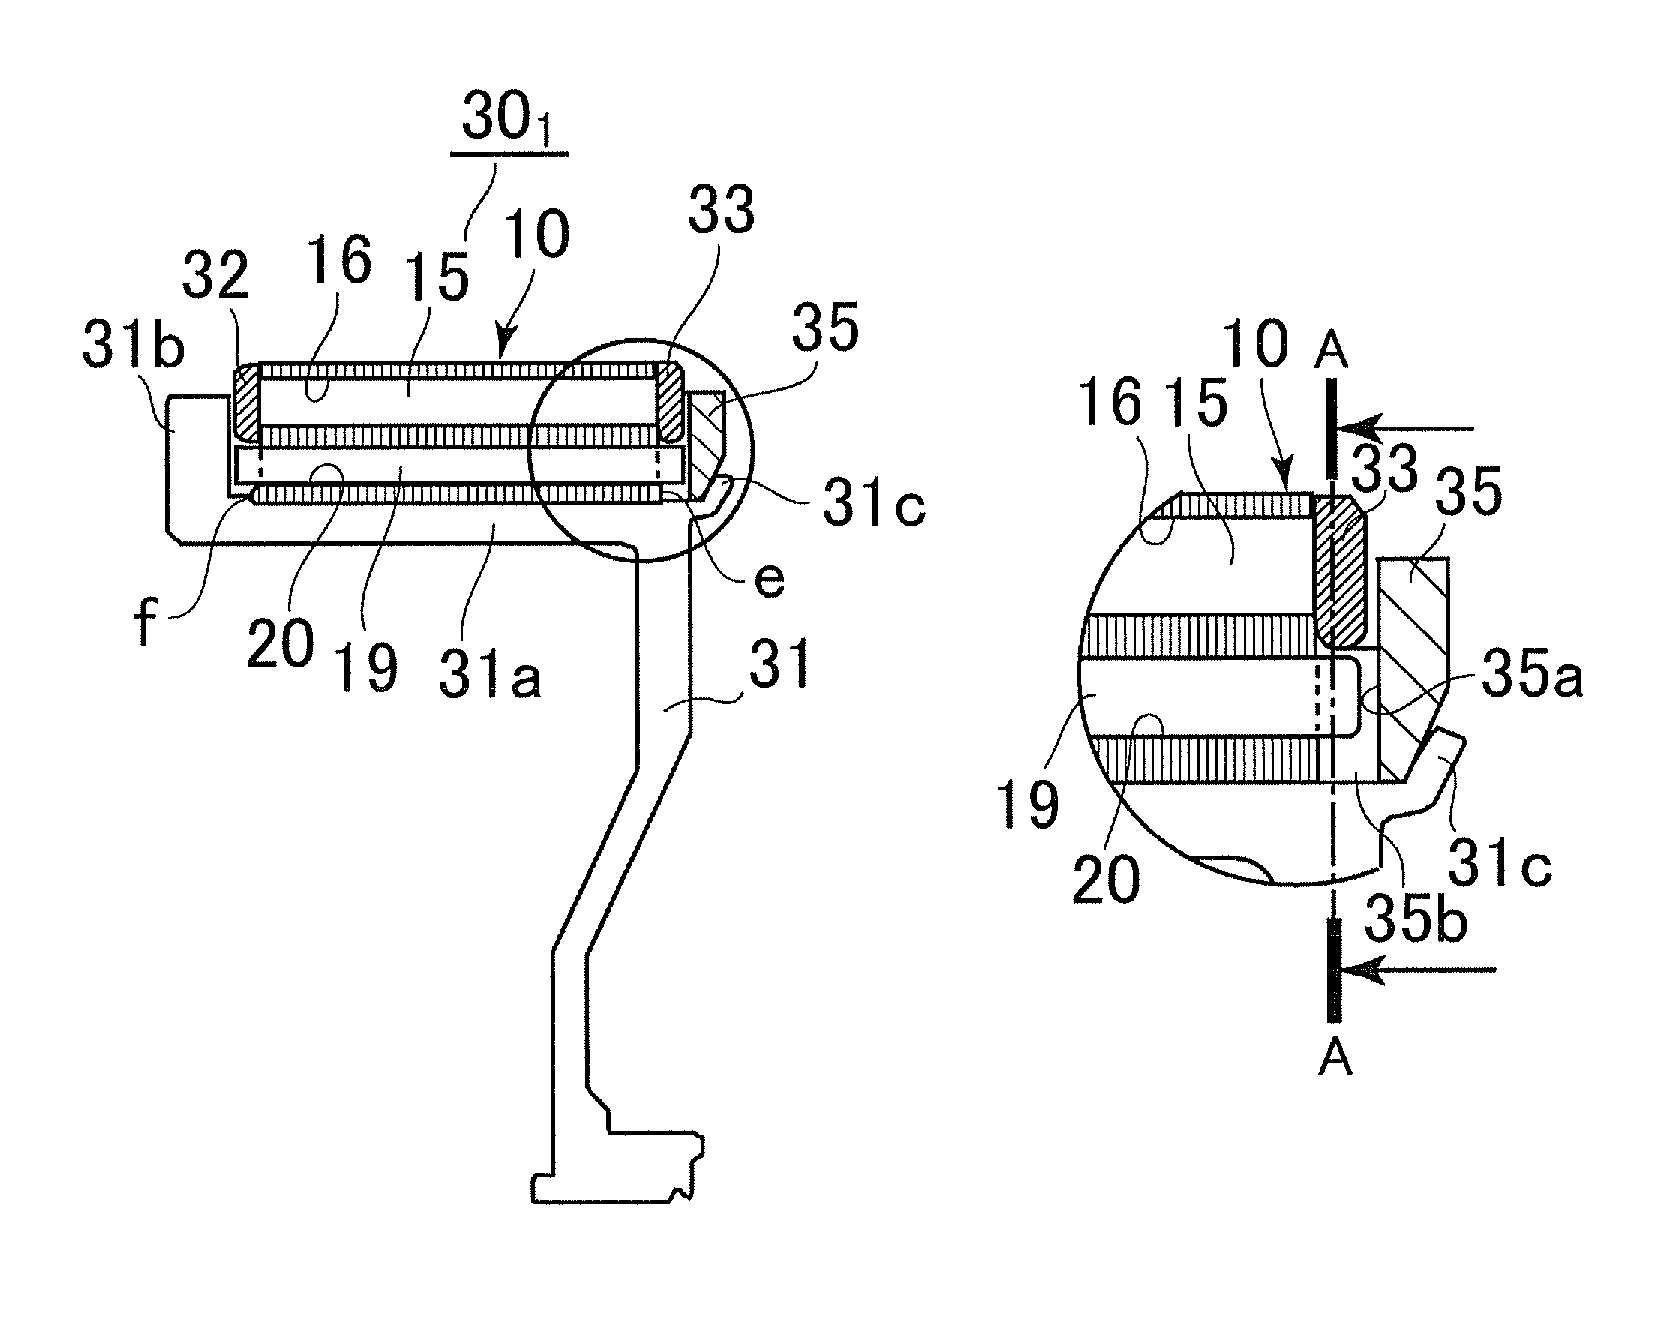 Rotor of rotating electrical machine